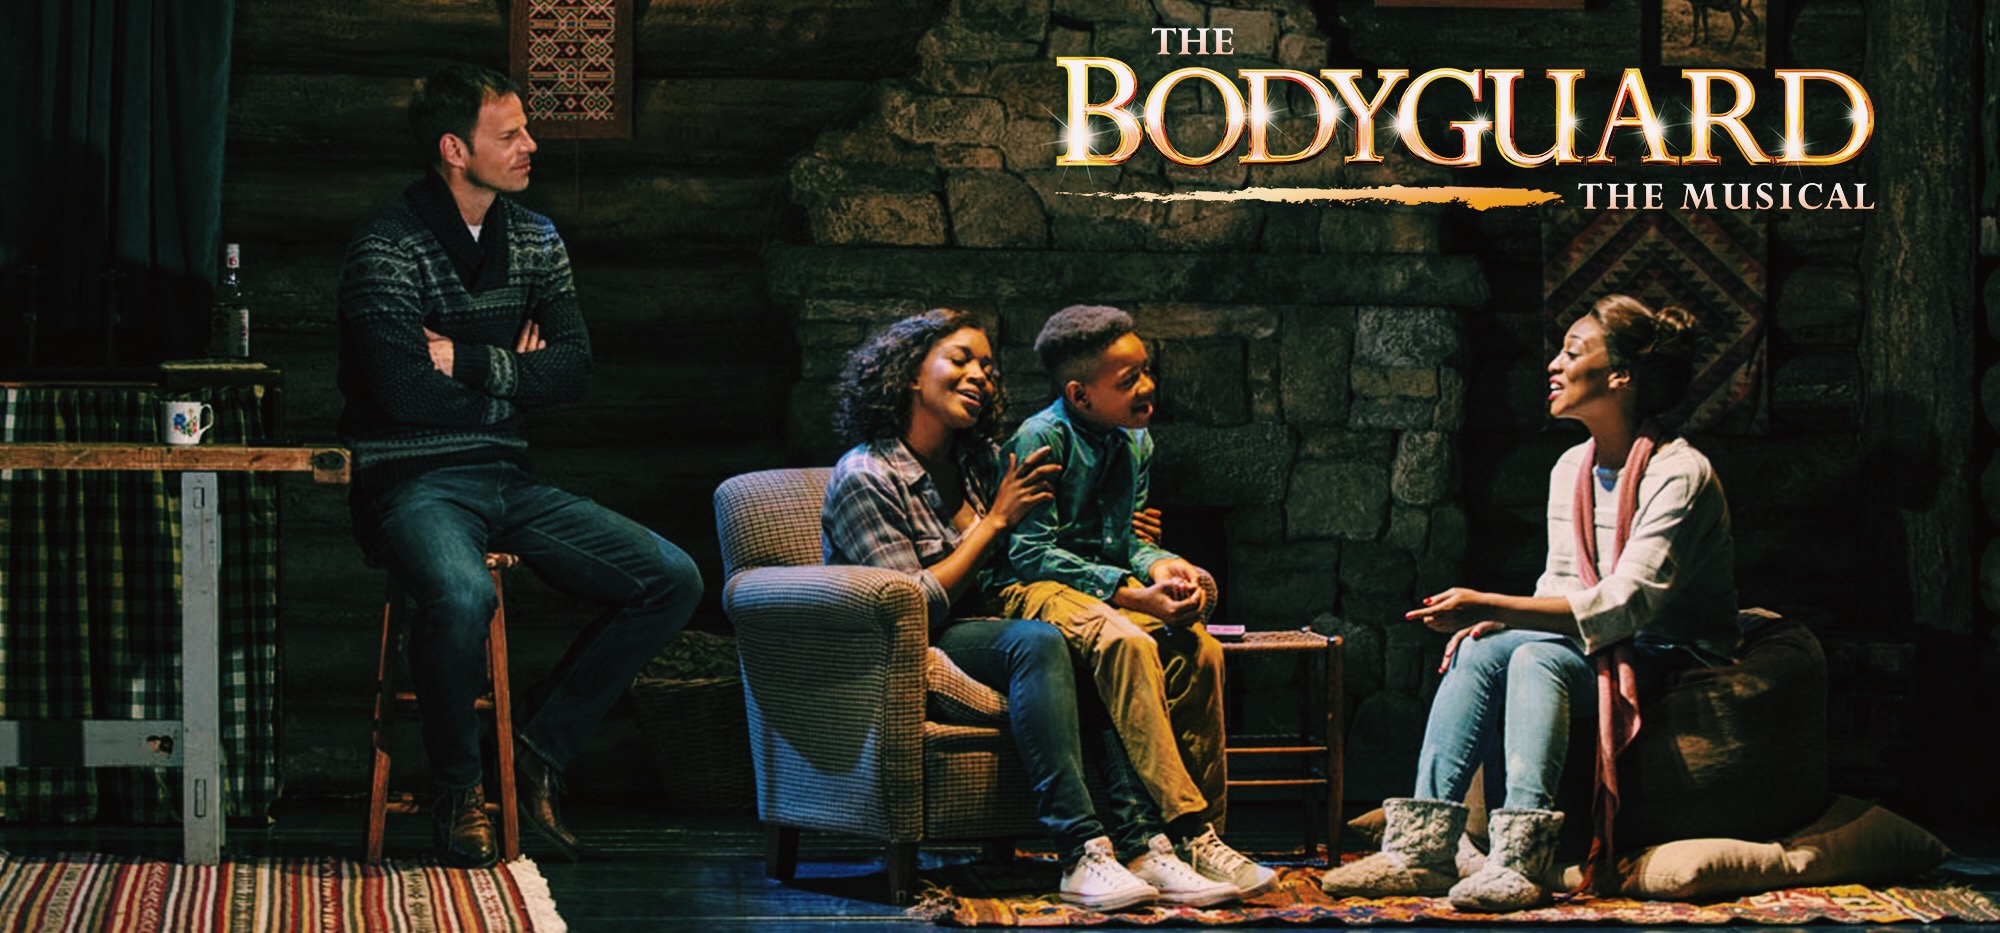 Happy Opening to THE BODYGUARD, Happy Trails to Eli Tokash, and more!